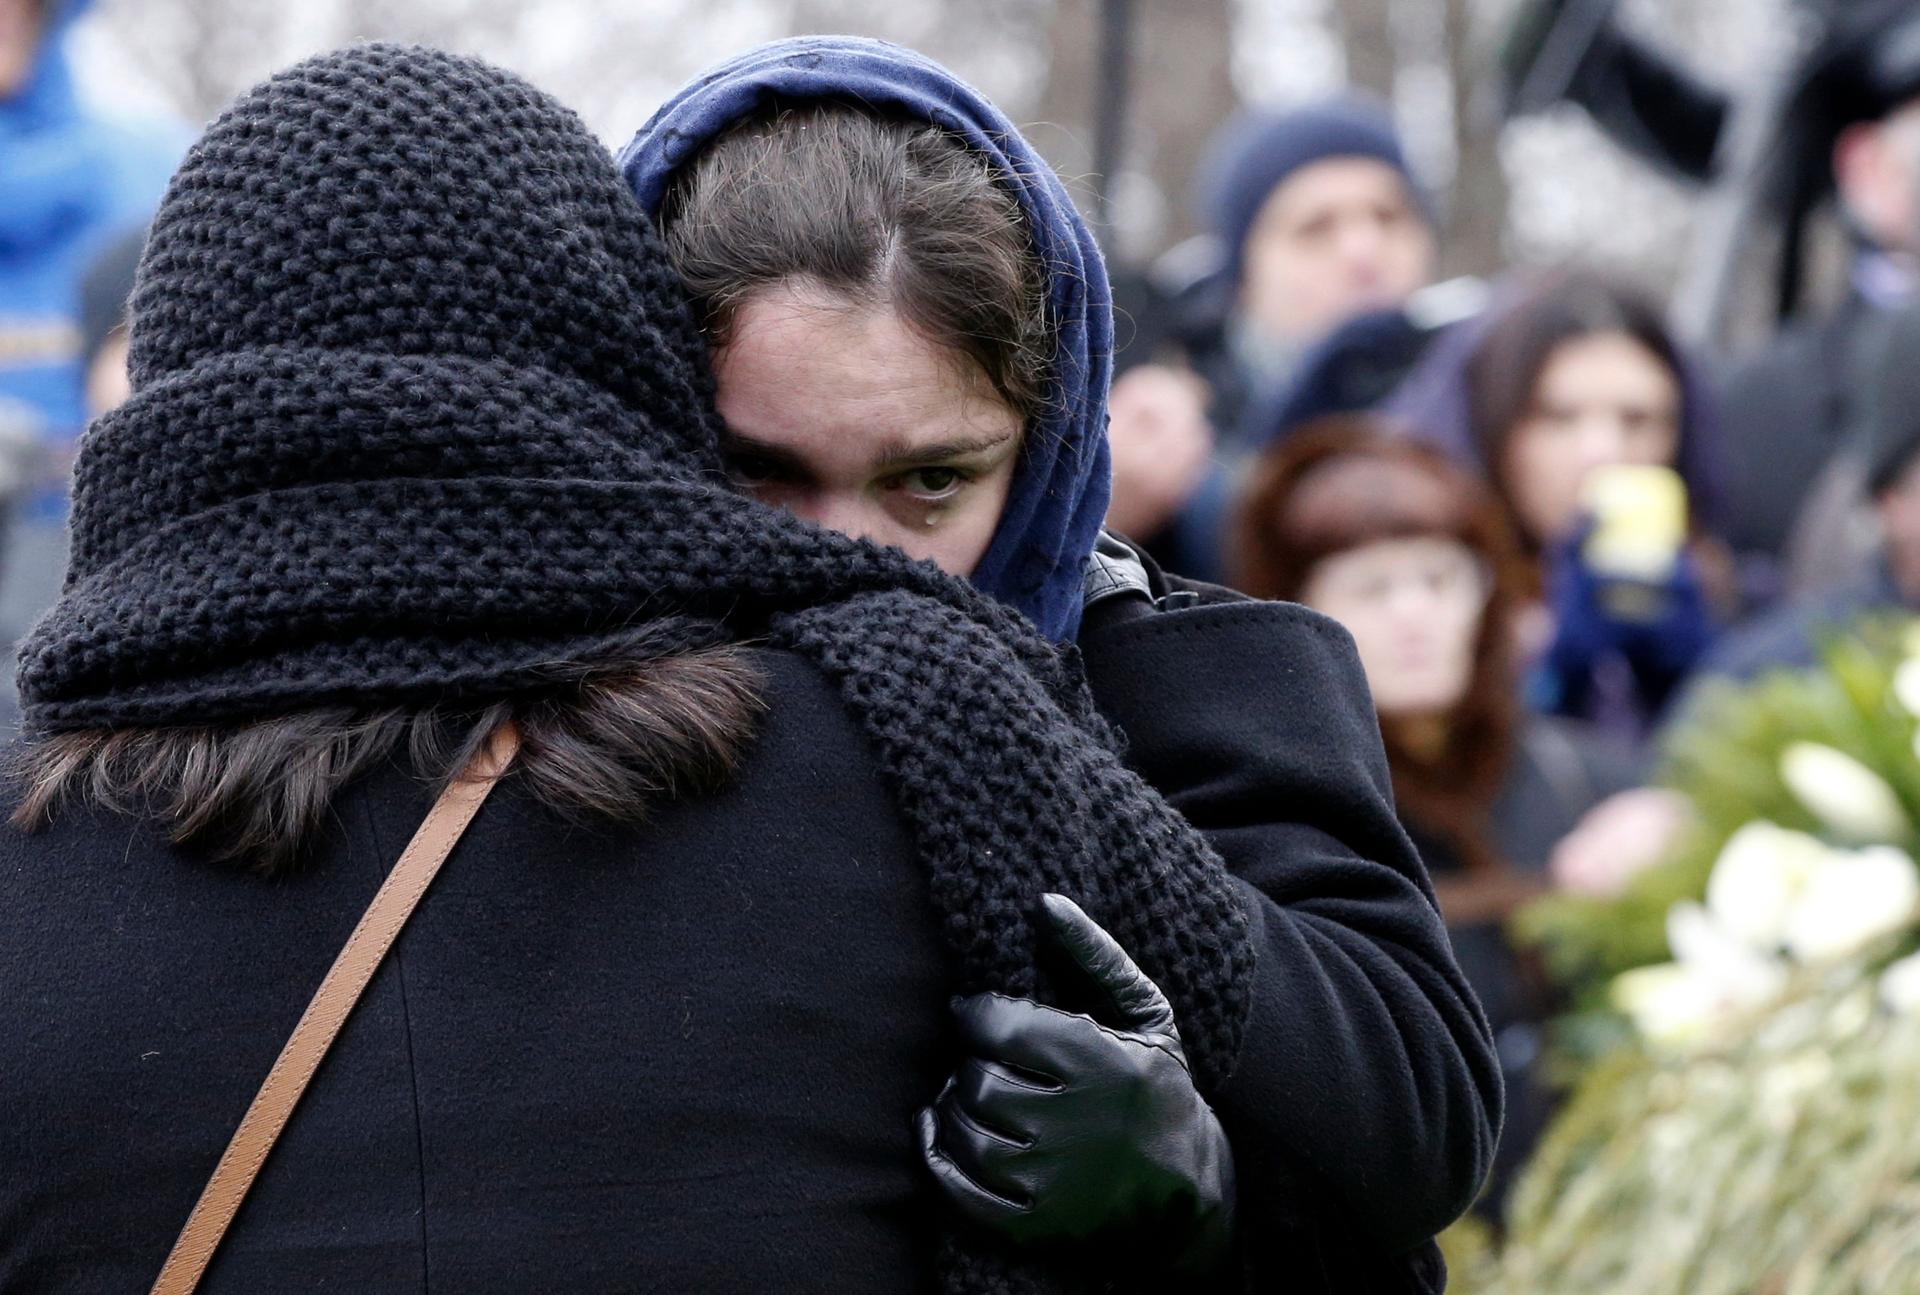 Zhanna Nemtsova, daughter of Russian leading opposition figure Boris Nemtsov, reacts during his funeral in Moscow on March 3, 2015.